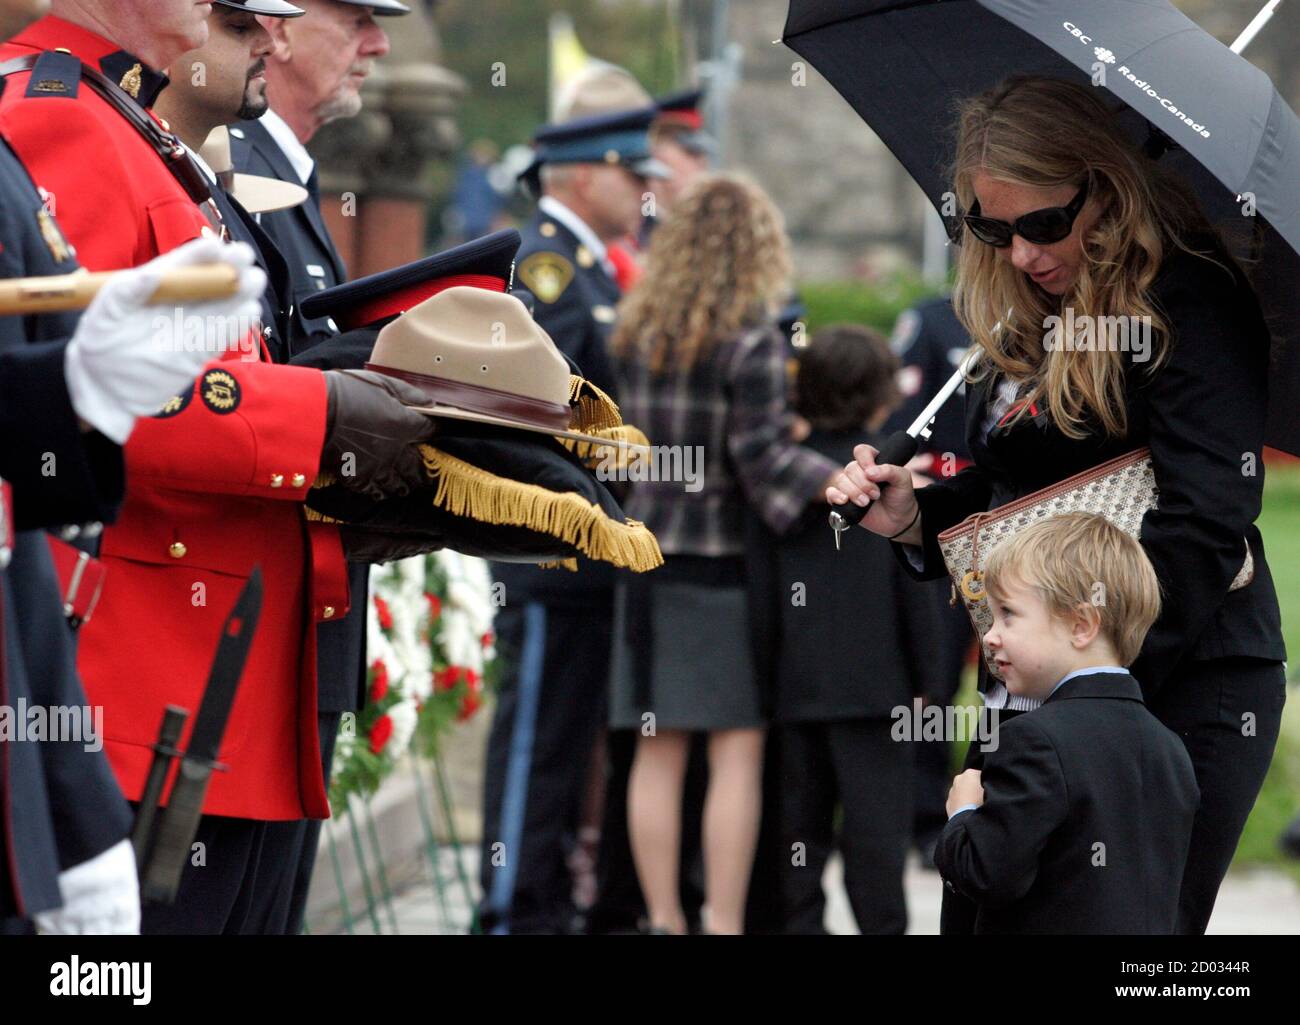 Owen Ochakovsky, the son of Peel Regional Police Officer Artem "James" Ochakovsky who was killed in March 2010 after his police cruiser was involved in a traffic accident, looks up at police officers holding hats on Parliament Hill in Ottawa, September 26, 2010. Owen and his mother Erin (also pictured) were attending the annual "Canadian Police and Peace Officer's Memorial Service" to honor police officers killed in the performance of their duties. REUTERS/Patrick Doyle (CANADA - Tags: SOCIETY) Stock Photo